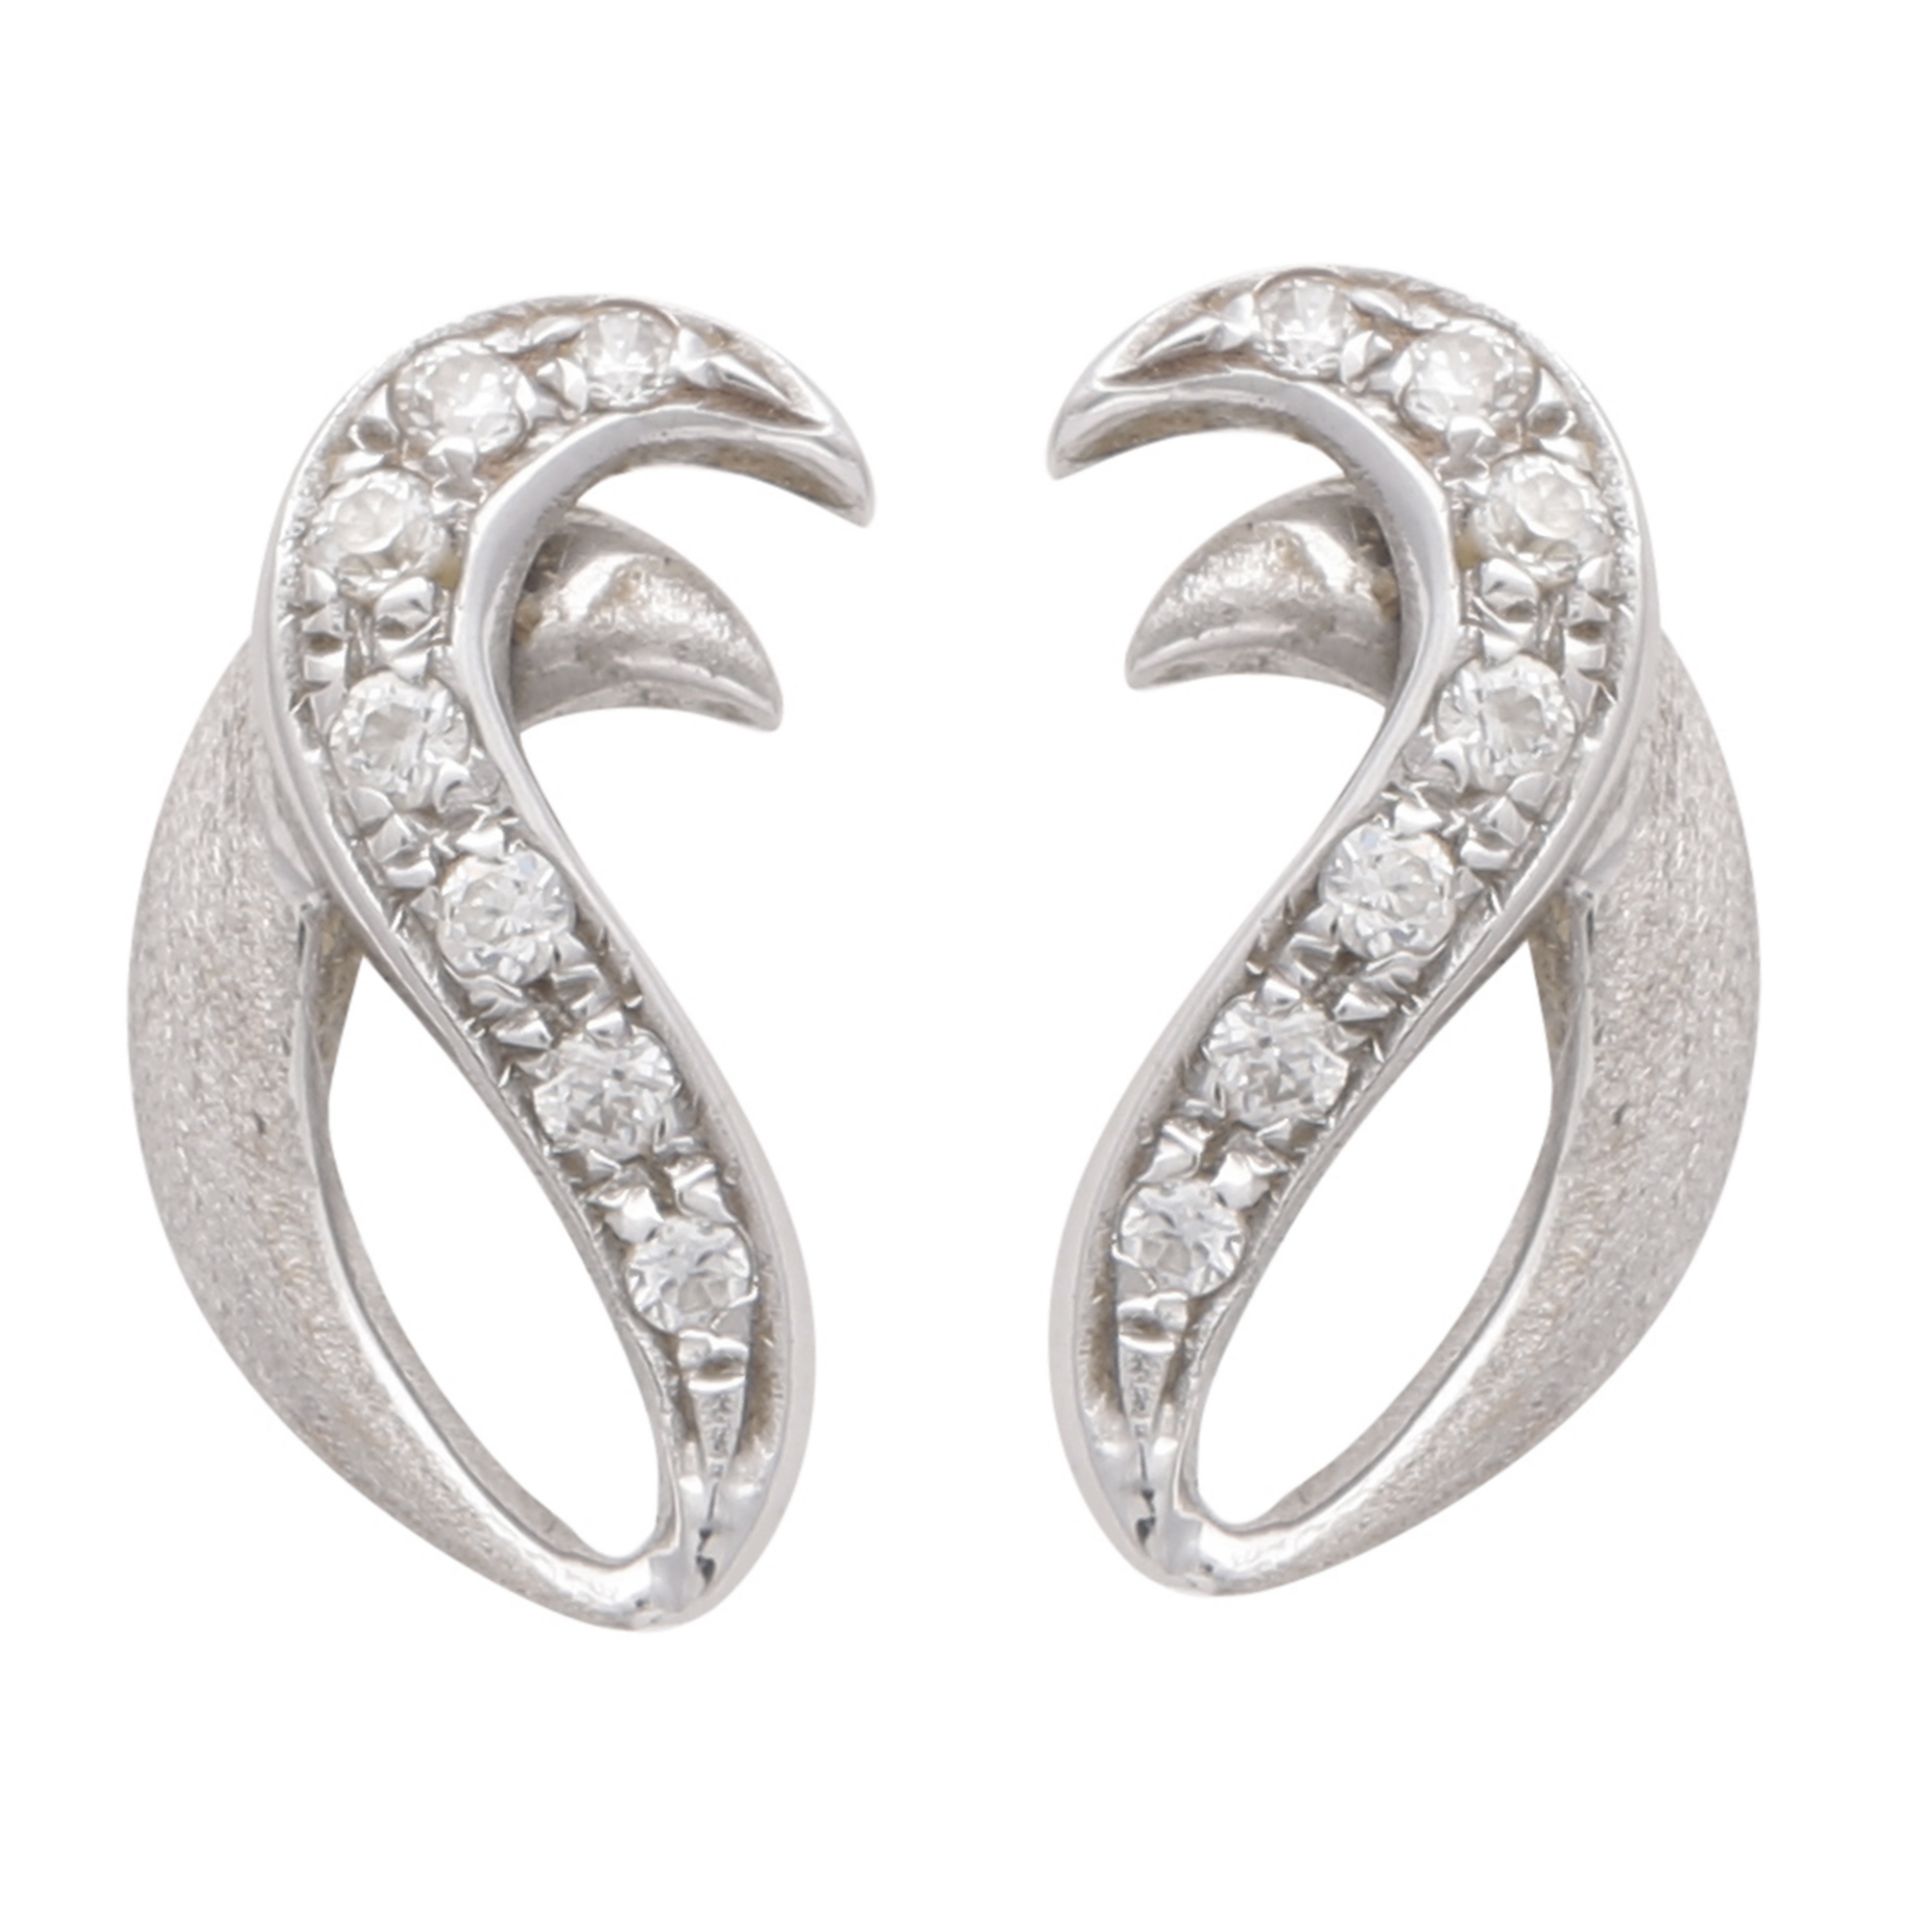 A pair of Italian gem set stud earrings in 18ct white gold, each designed as two overlapping